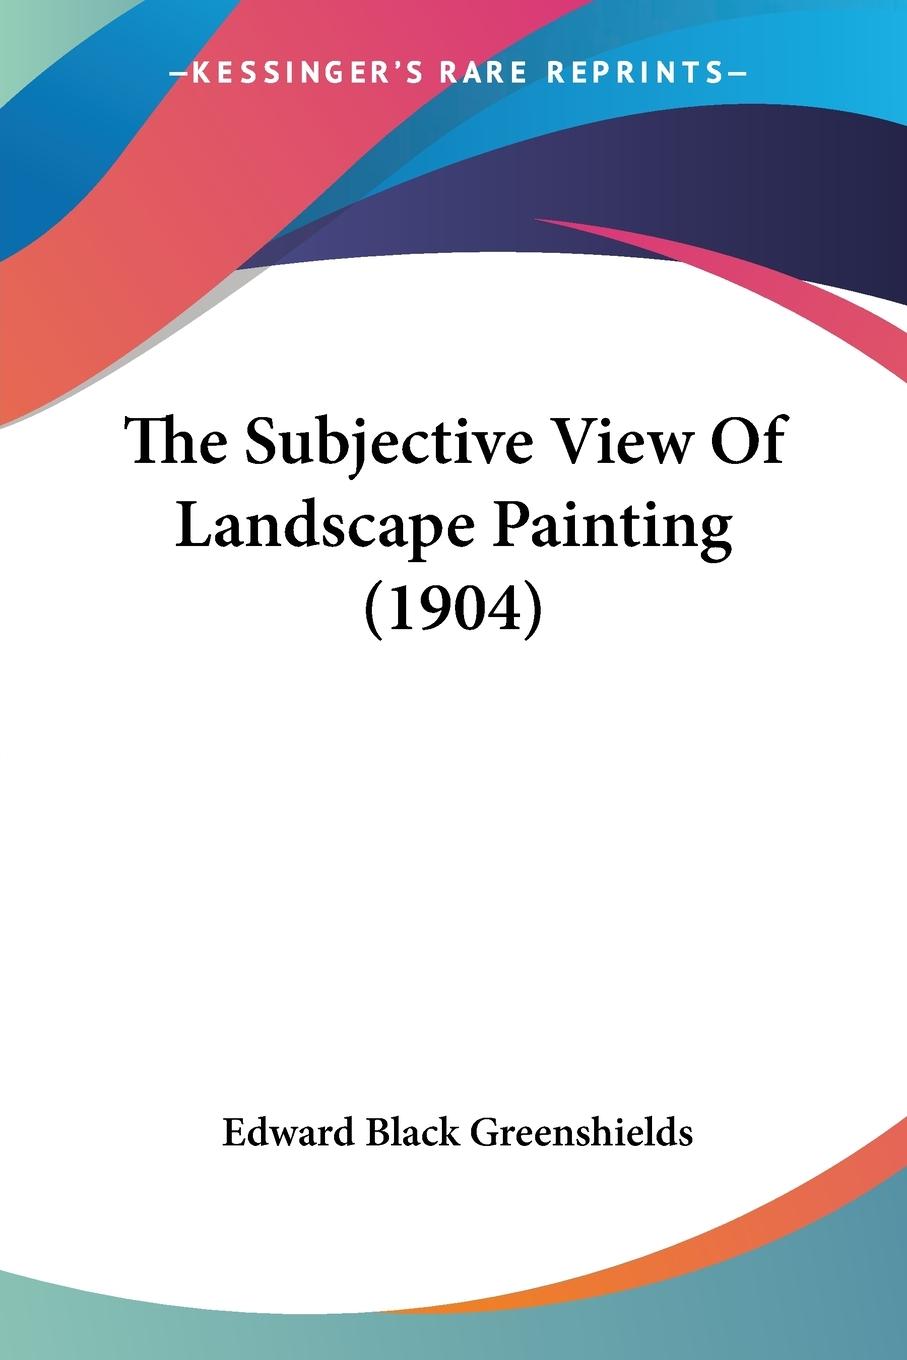 The Subjective View Of Landscape Painting (1904) - Greenshields, Edward Black